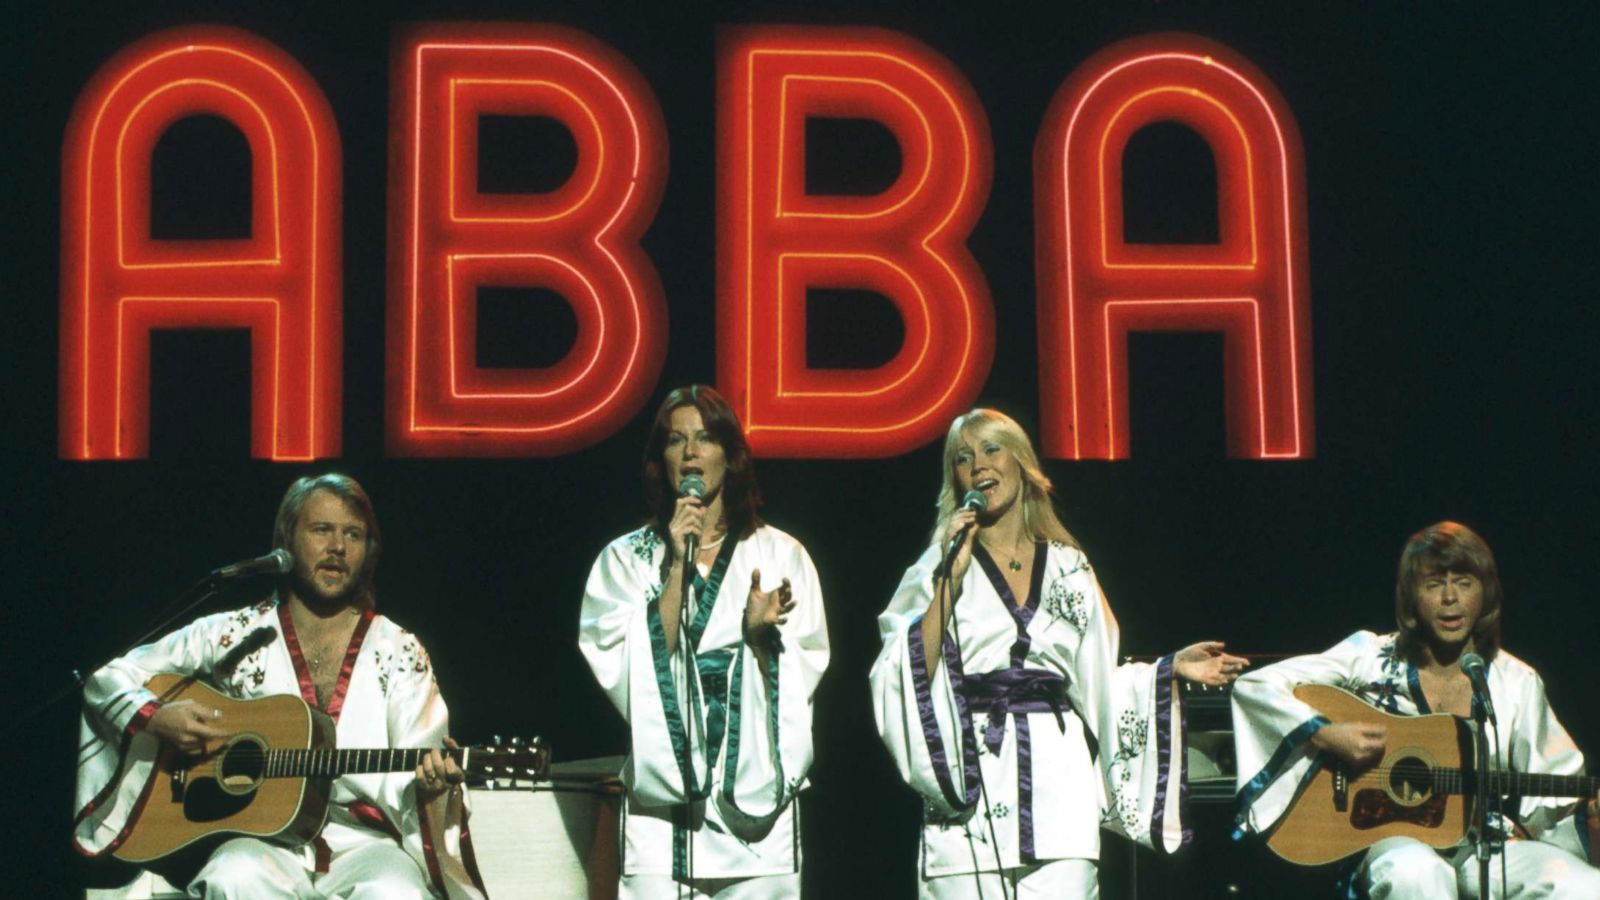 PHOTO: Swedish pop group ABBA performing live in this undated photo.